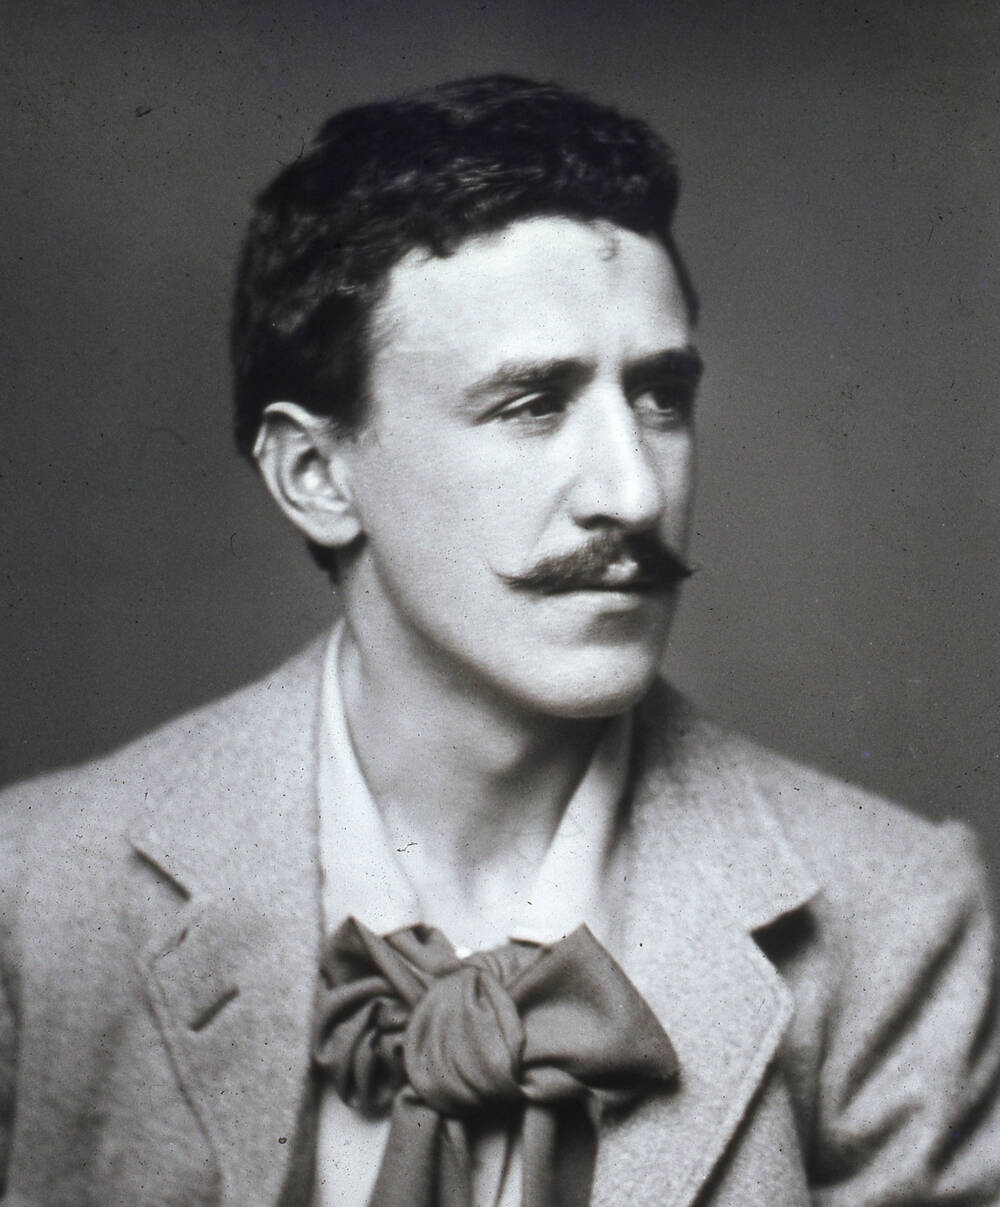 A black and white photograph of Charles Rennie Mackintosh​​, wearing a large cravat and showing his distinctive moustache.